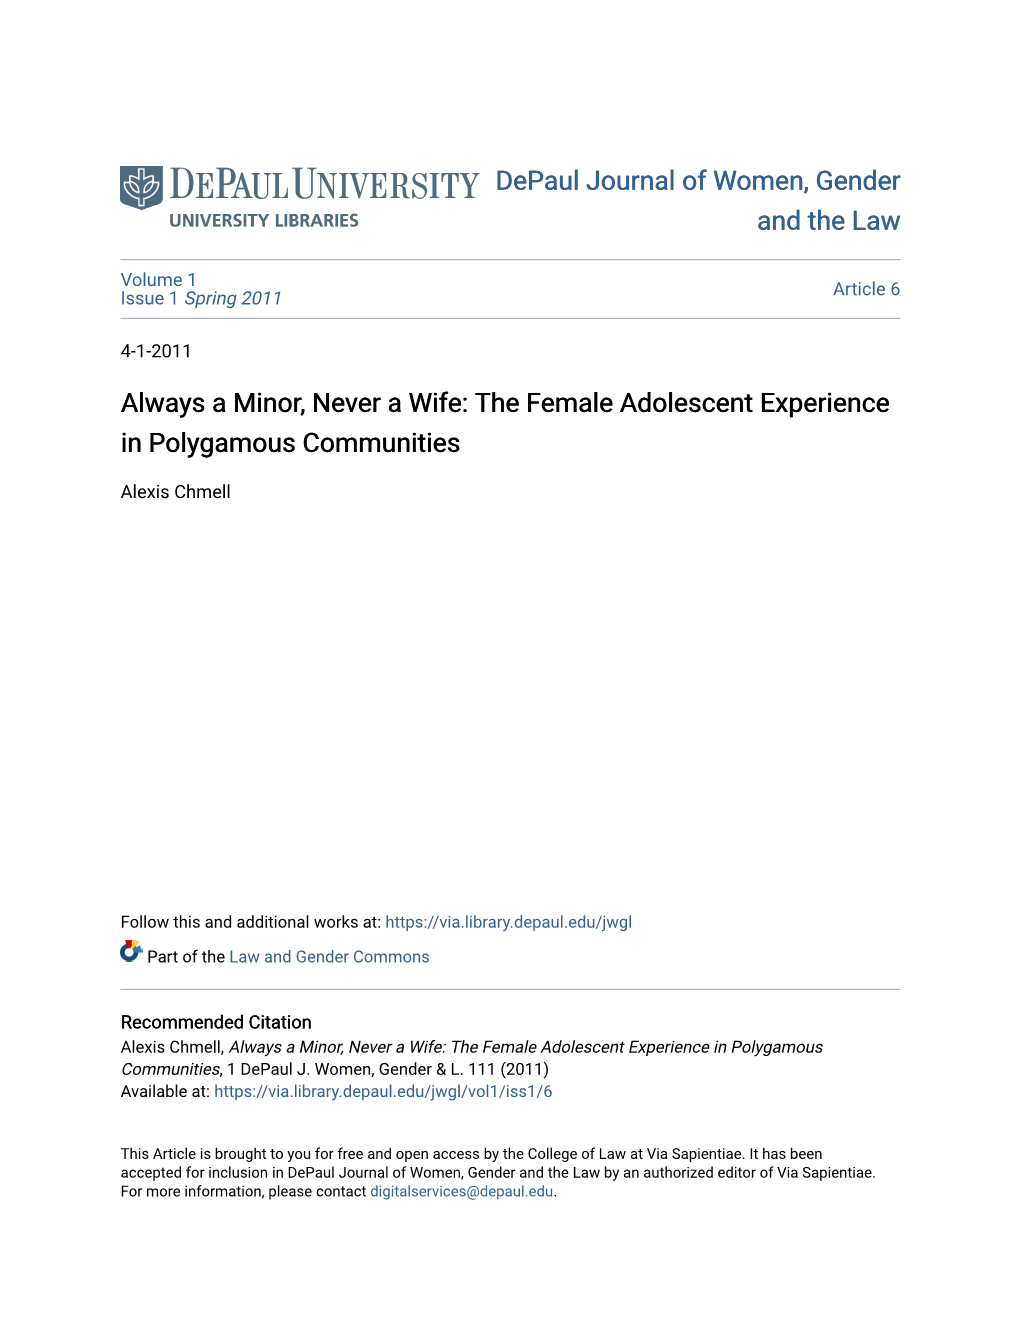 The Female Adolescent Experience in Polygamous Communities